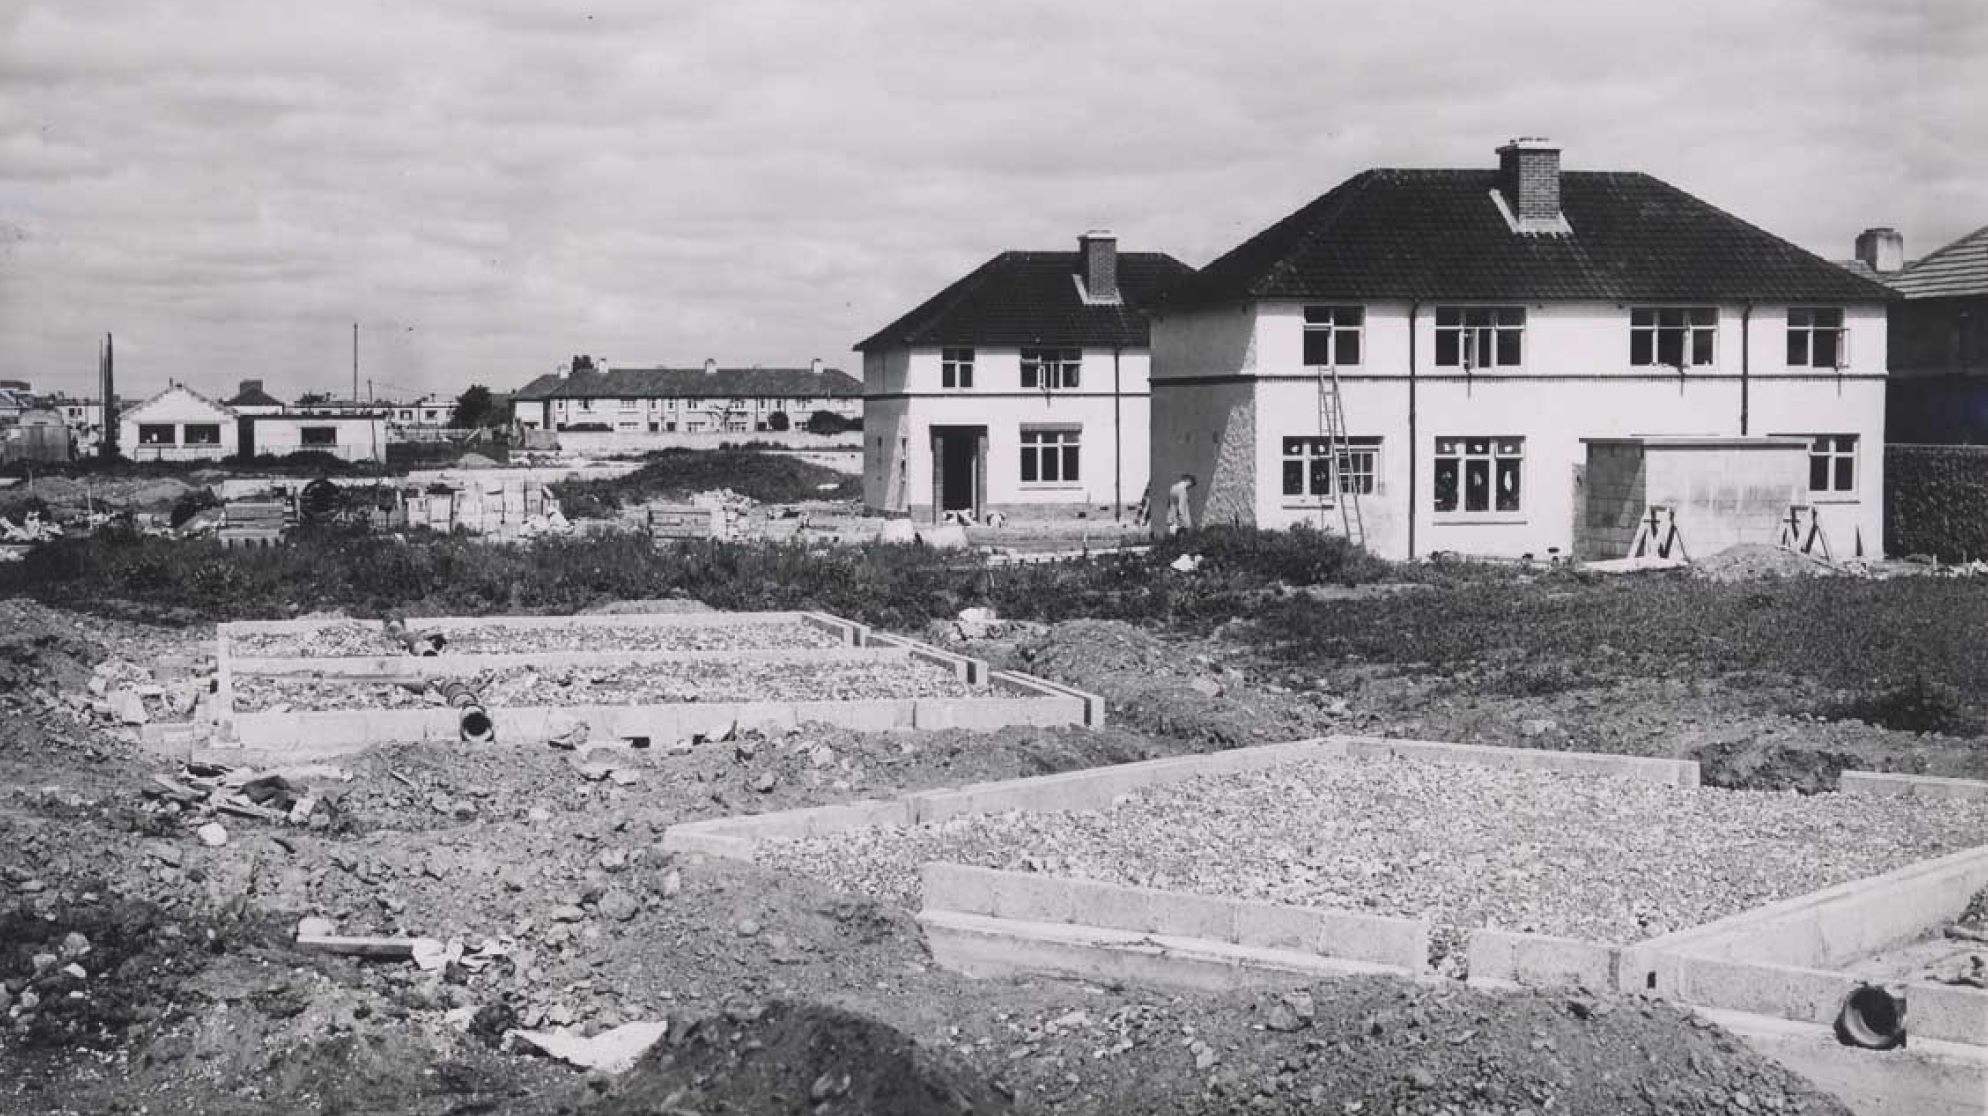 Black and white photograph of a house under construction in the Terenure housing estate, 1949